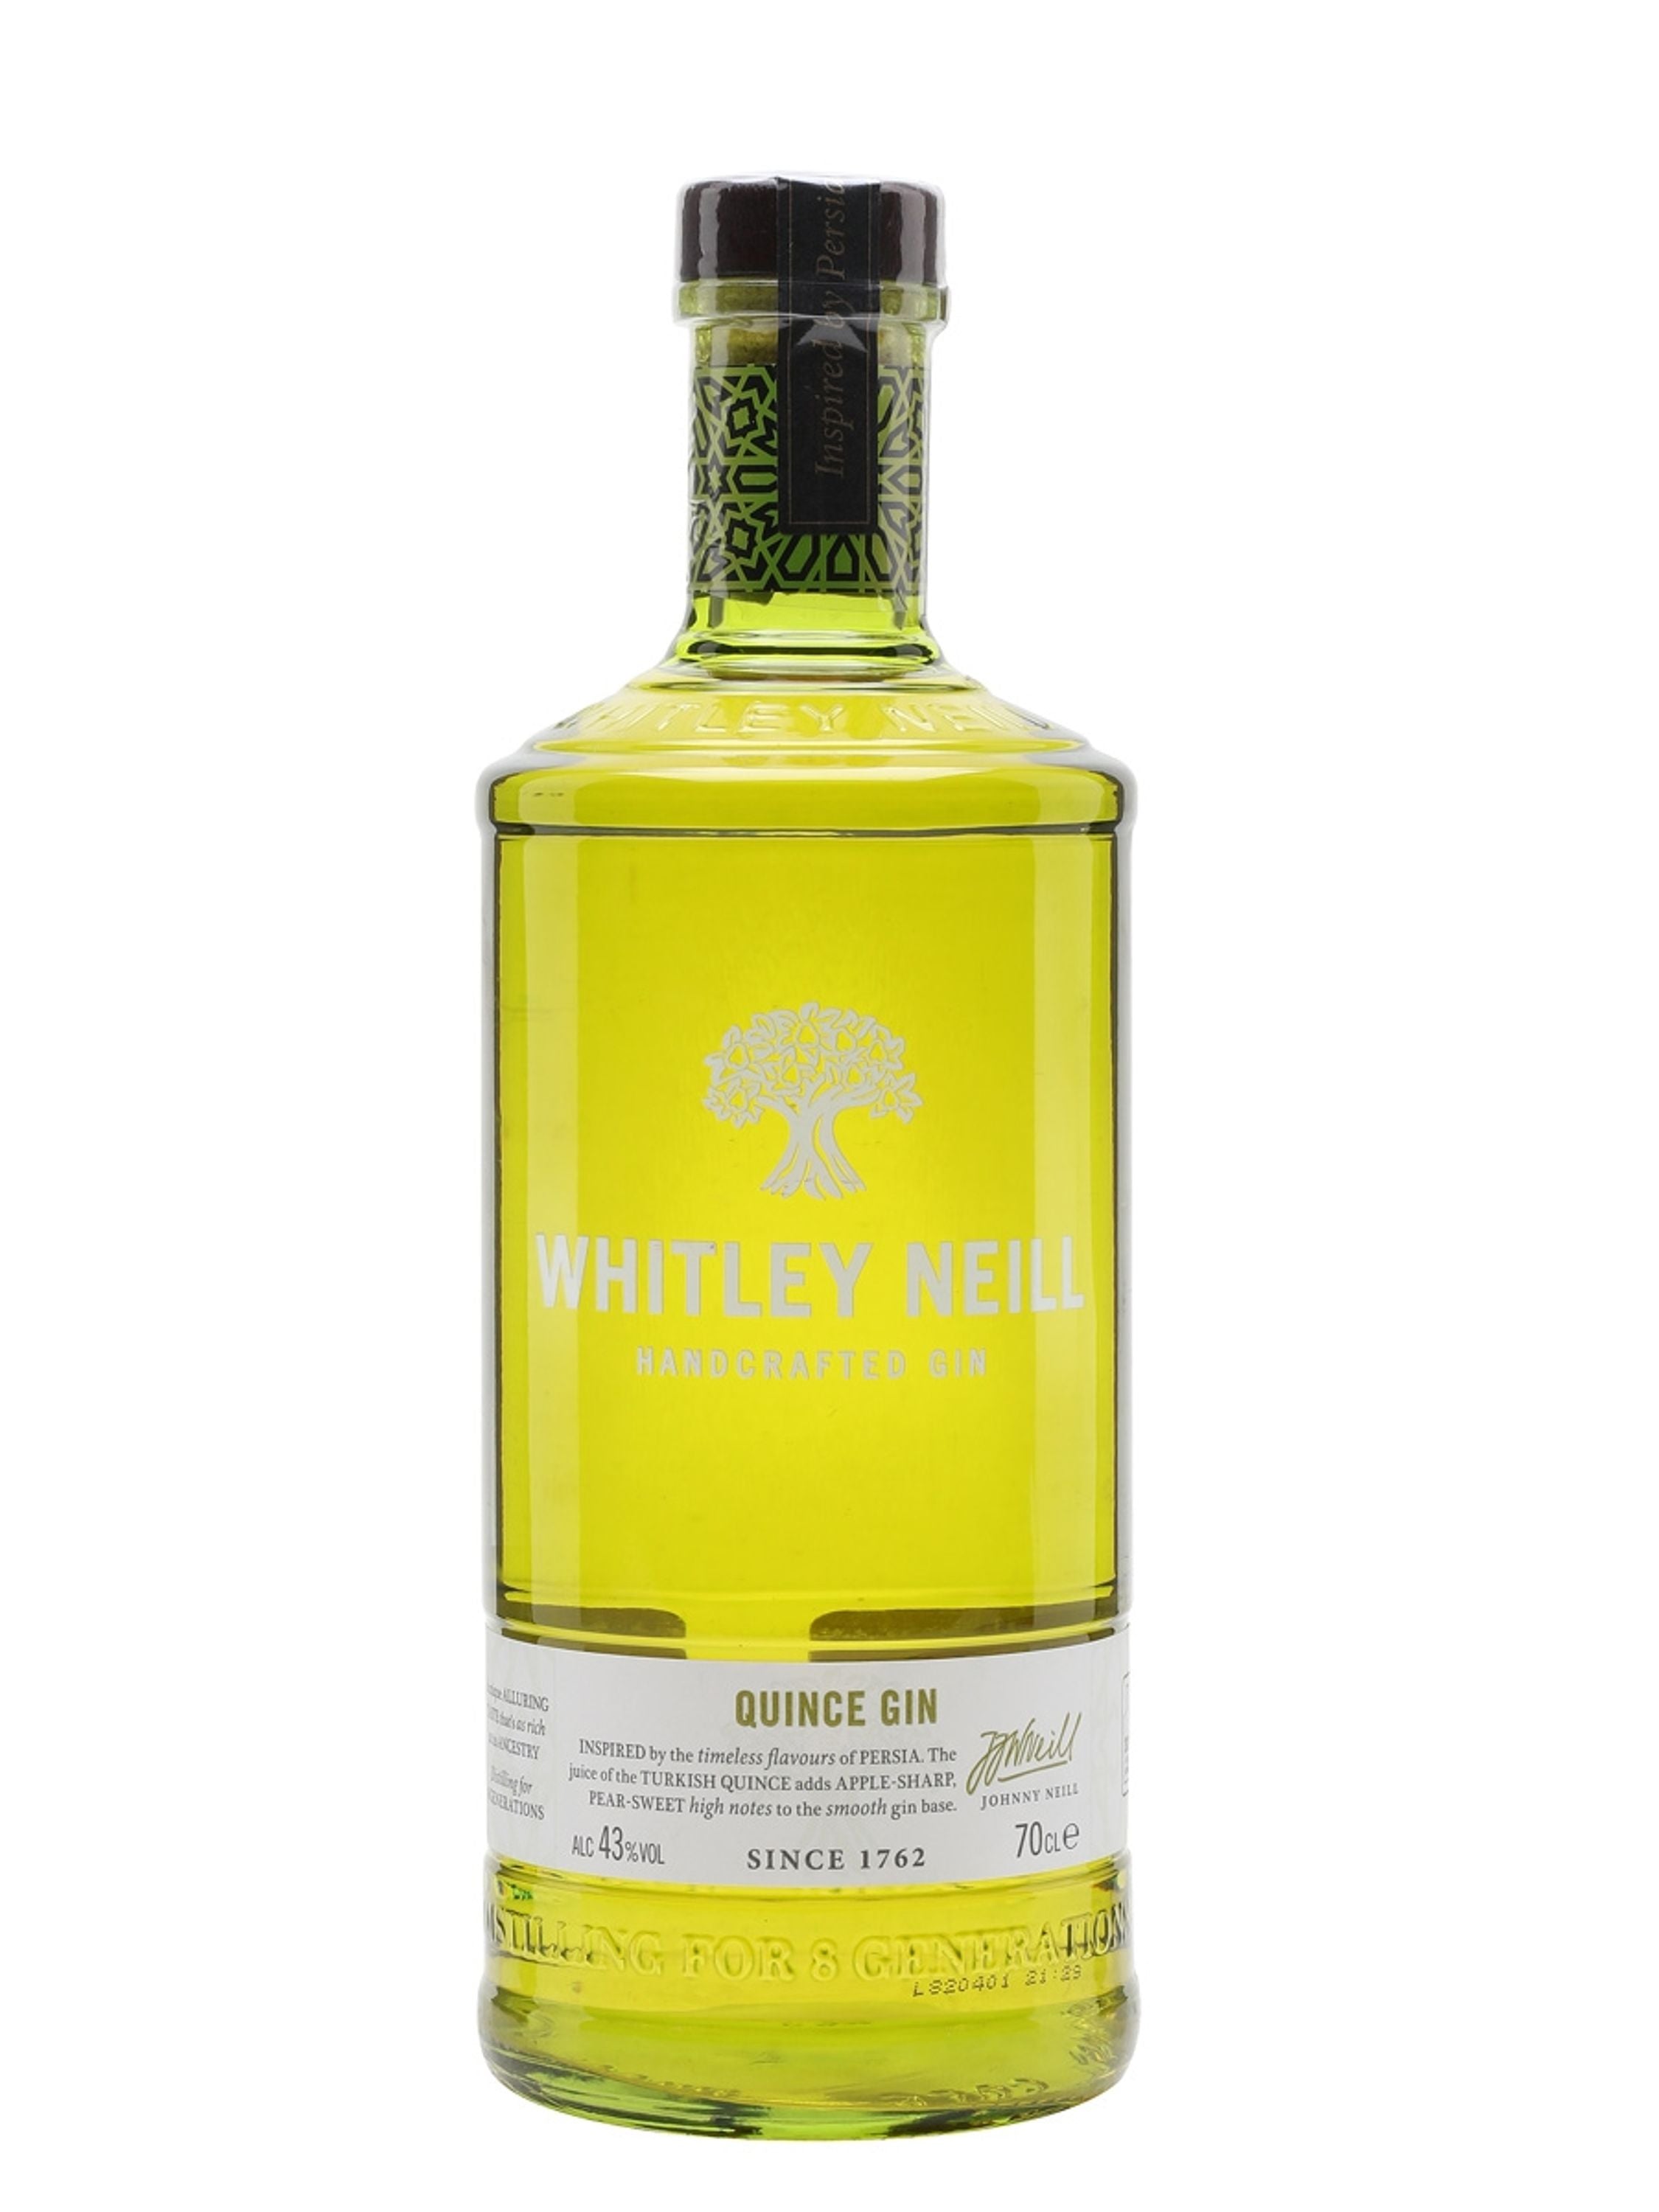 Whitley Neill Quince Gin 0,7l, alc. 43% ABV, Gin England